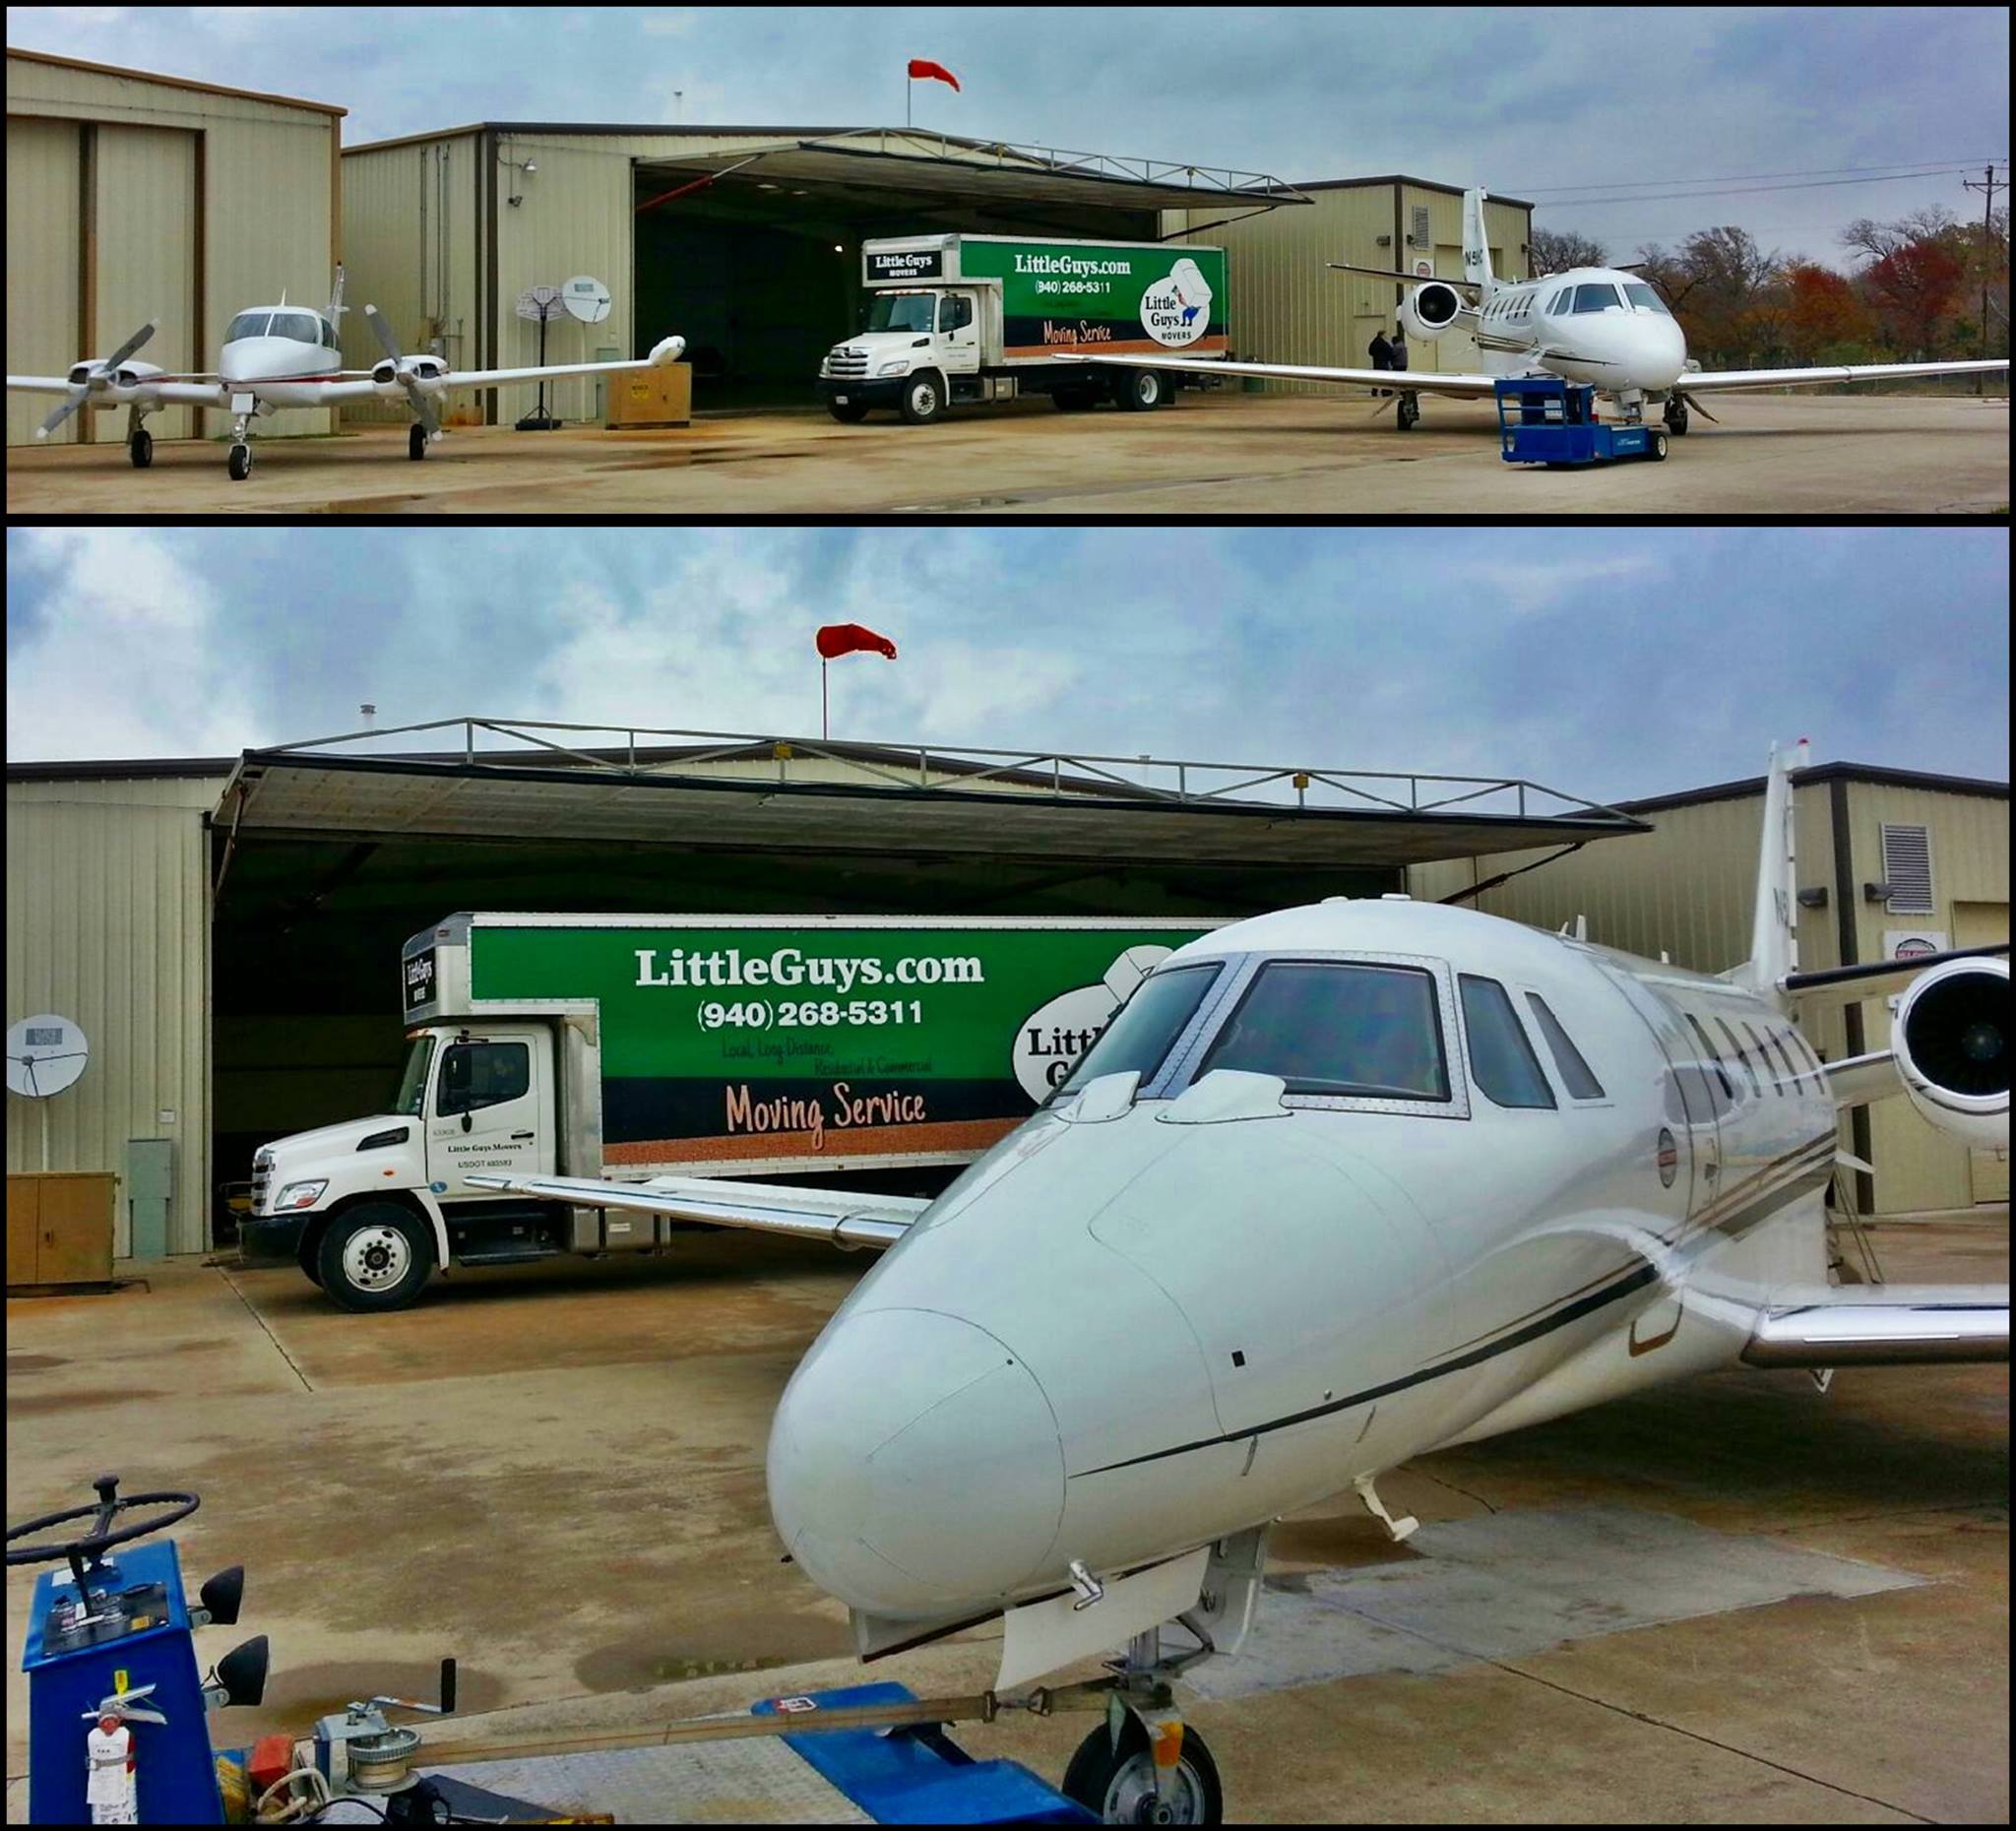 Little Guys Movers truck next to air hangar with airplanes